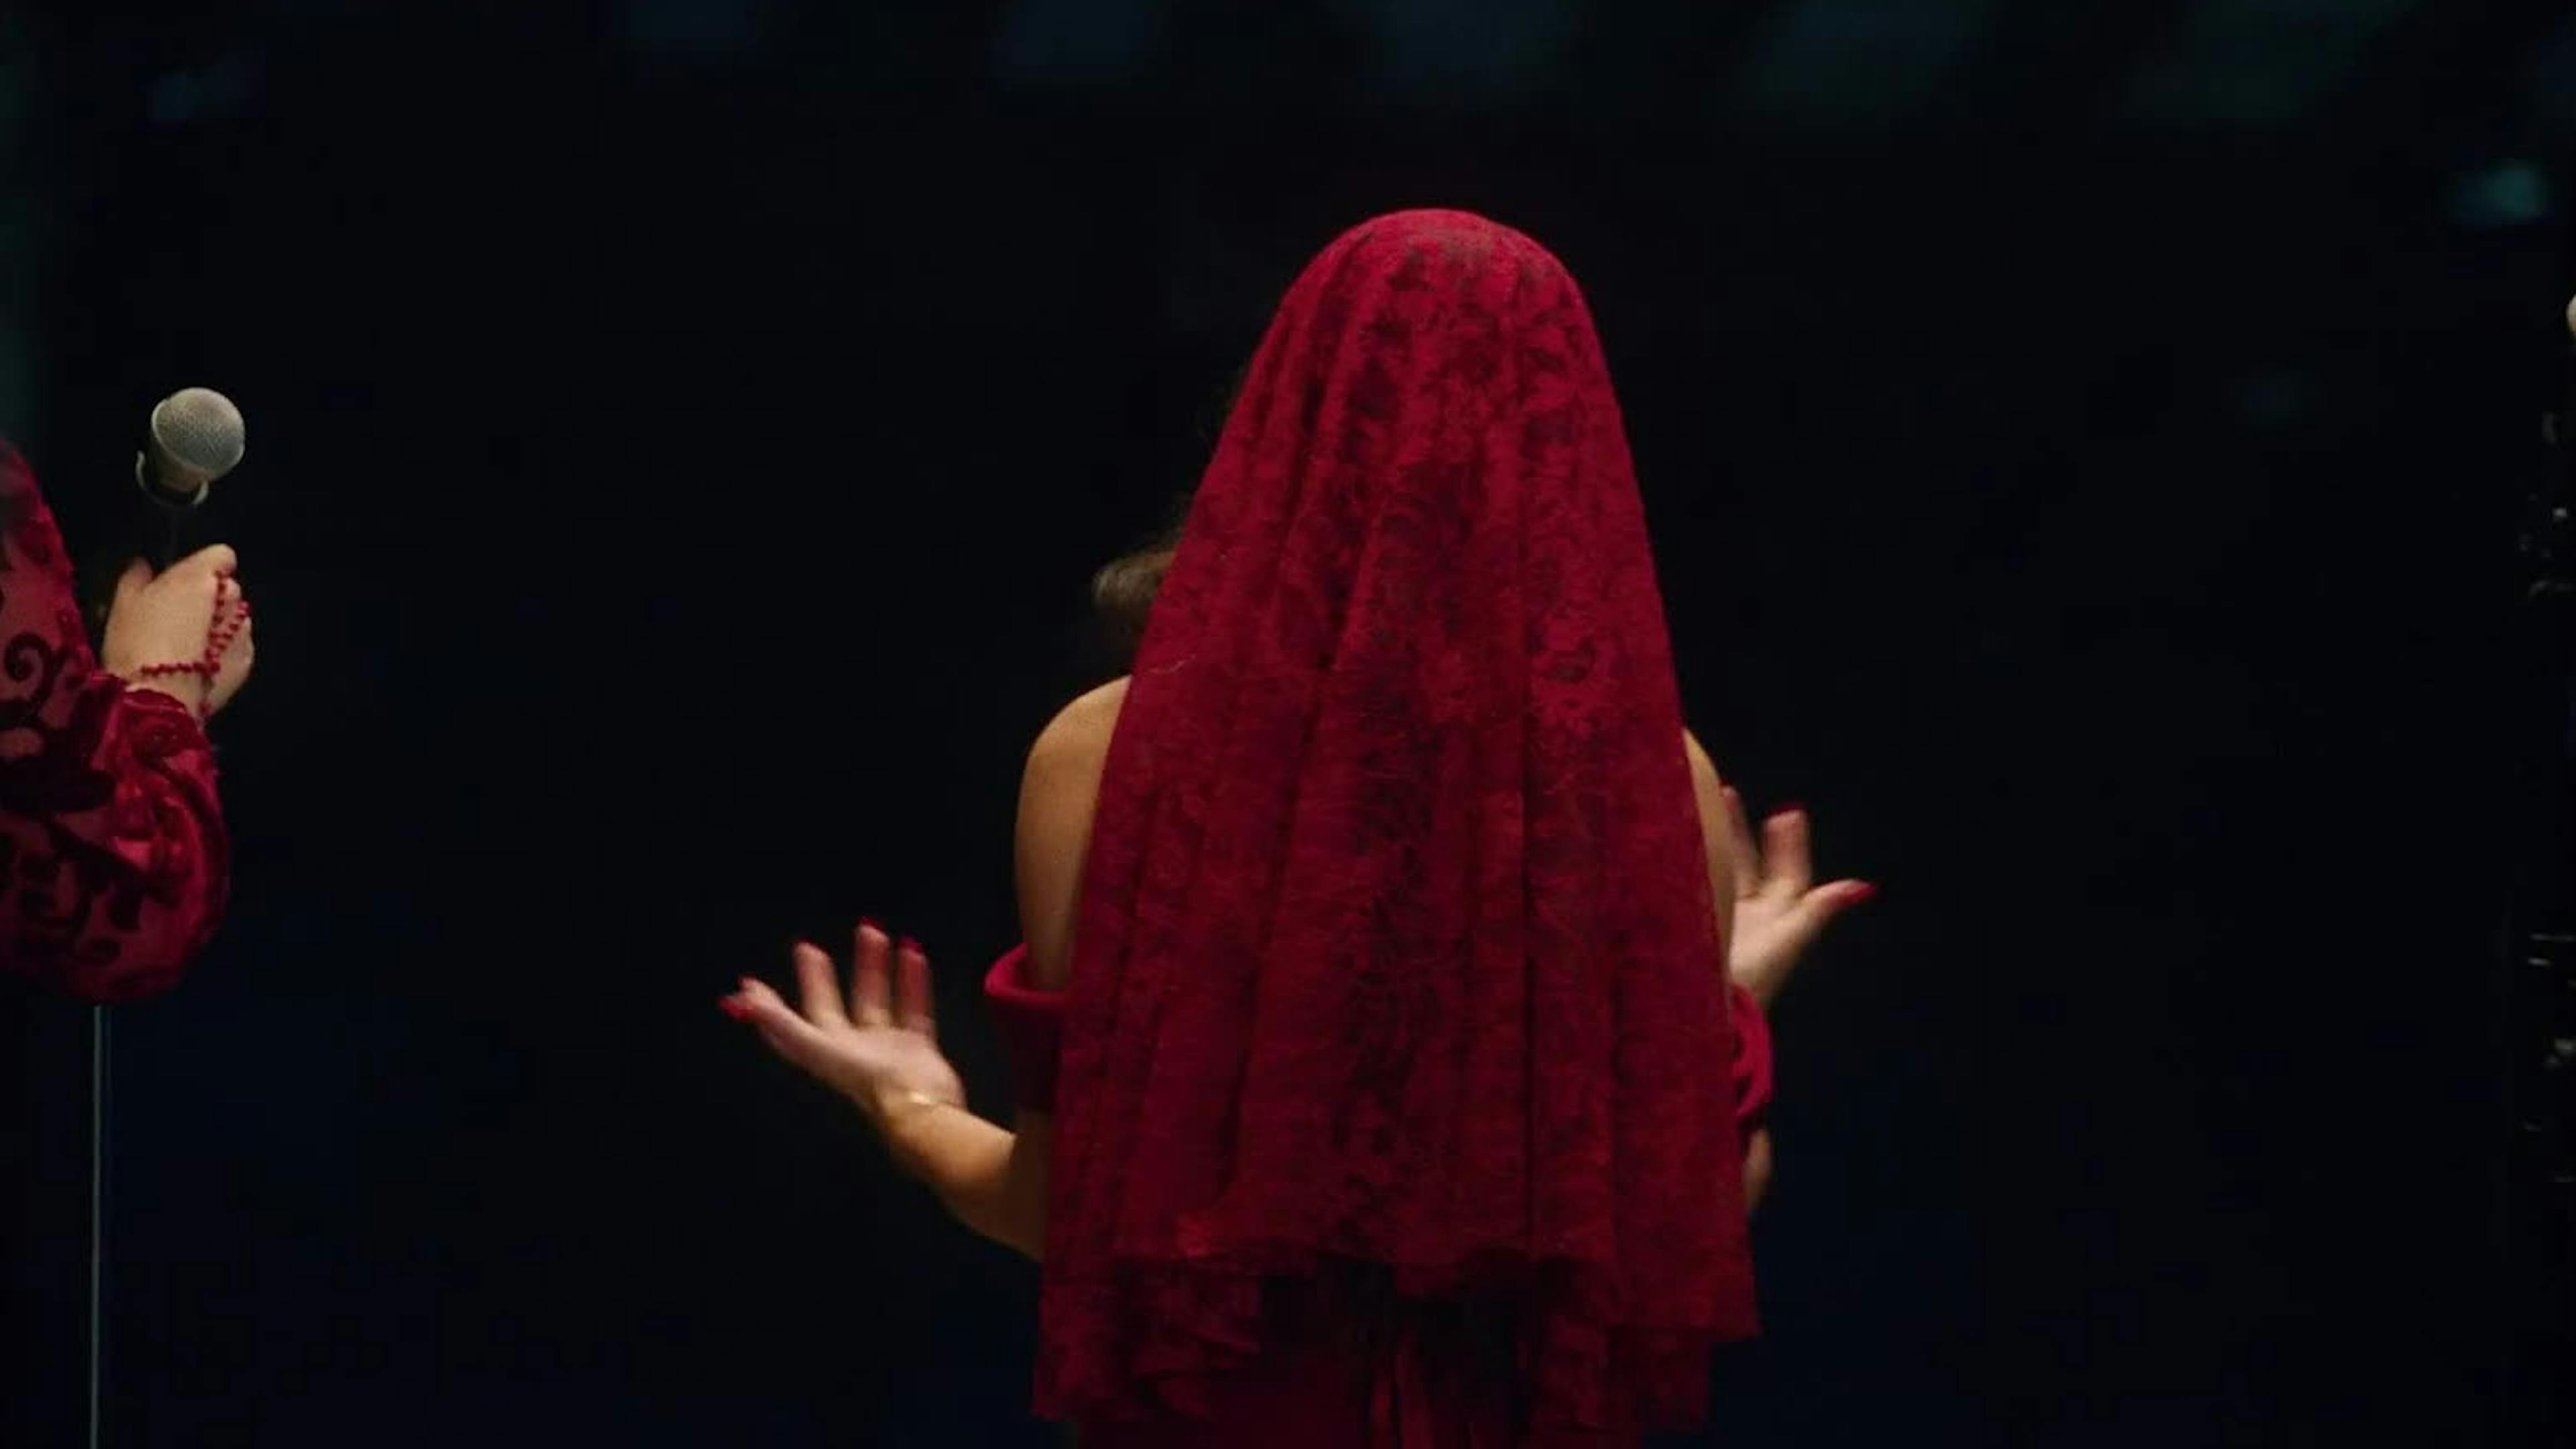 A woman in a red veil is shown from the back